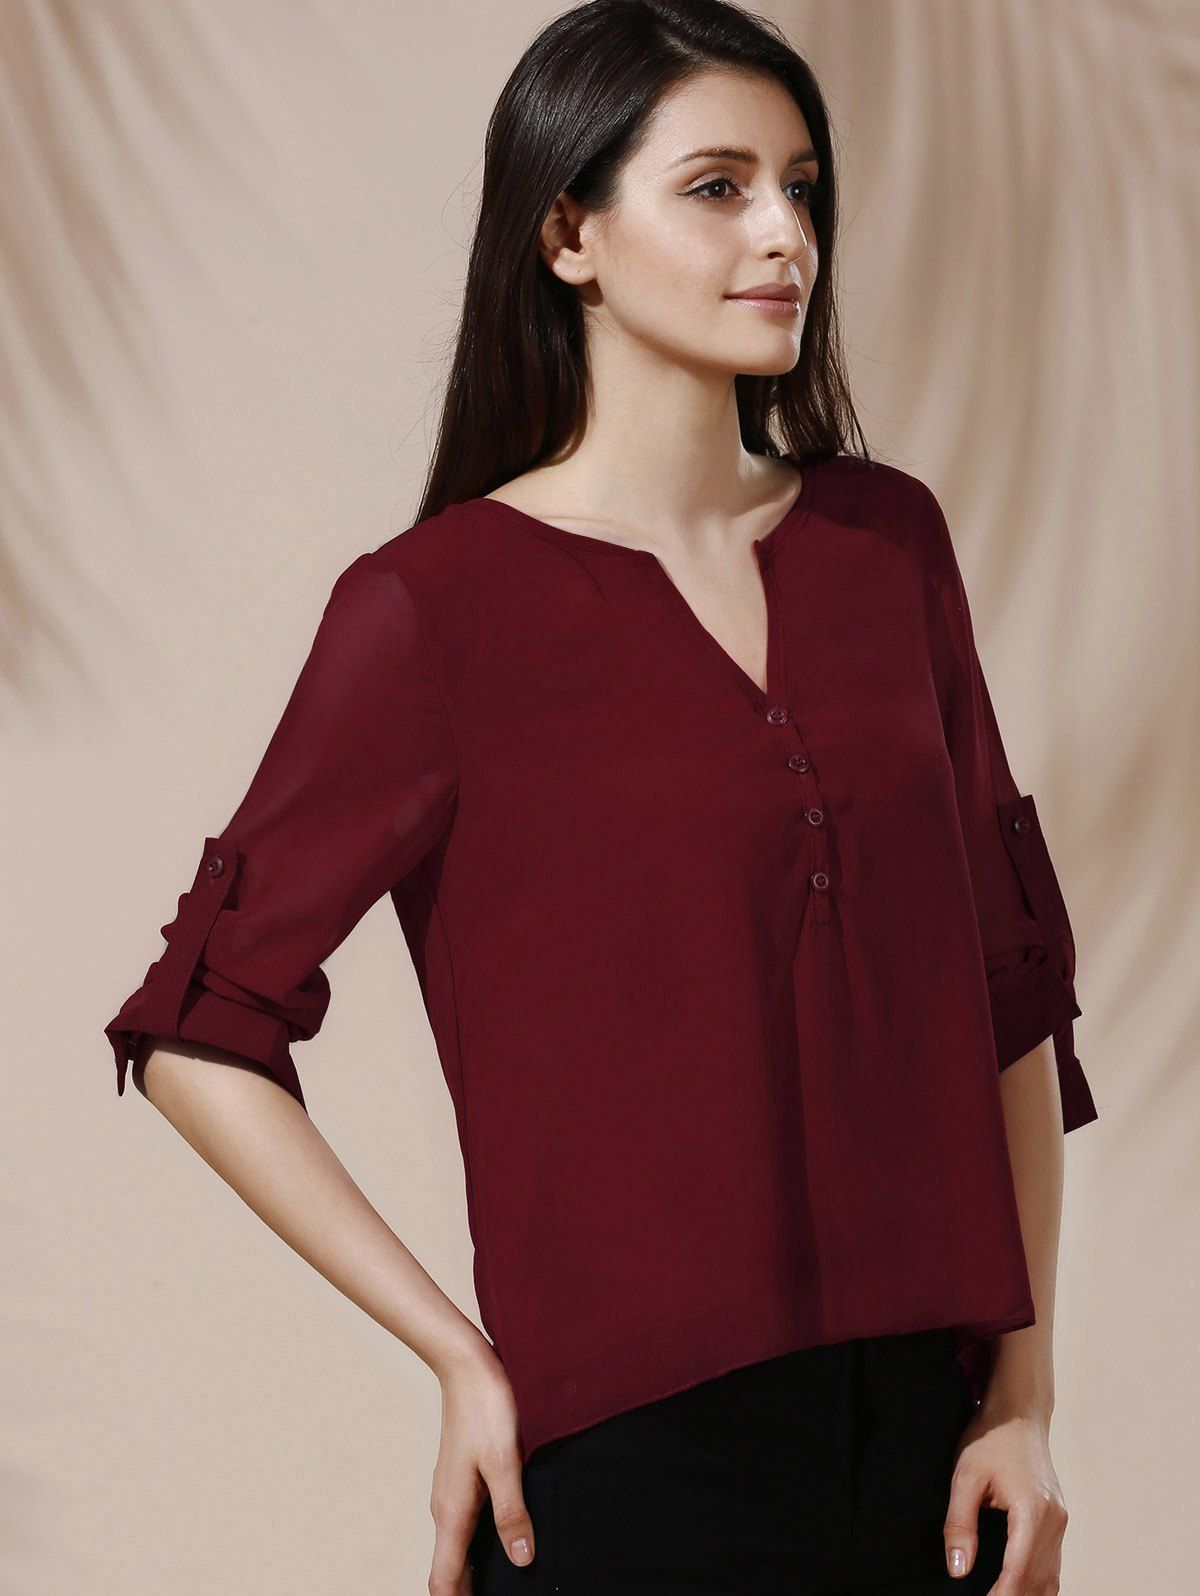 Womens red blouses for sale by owner